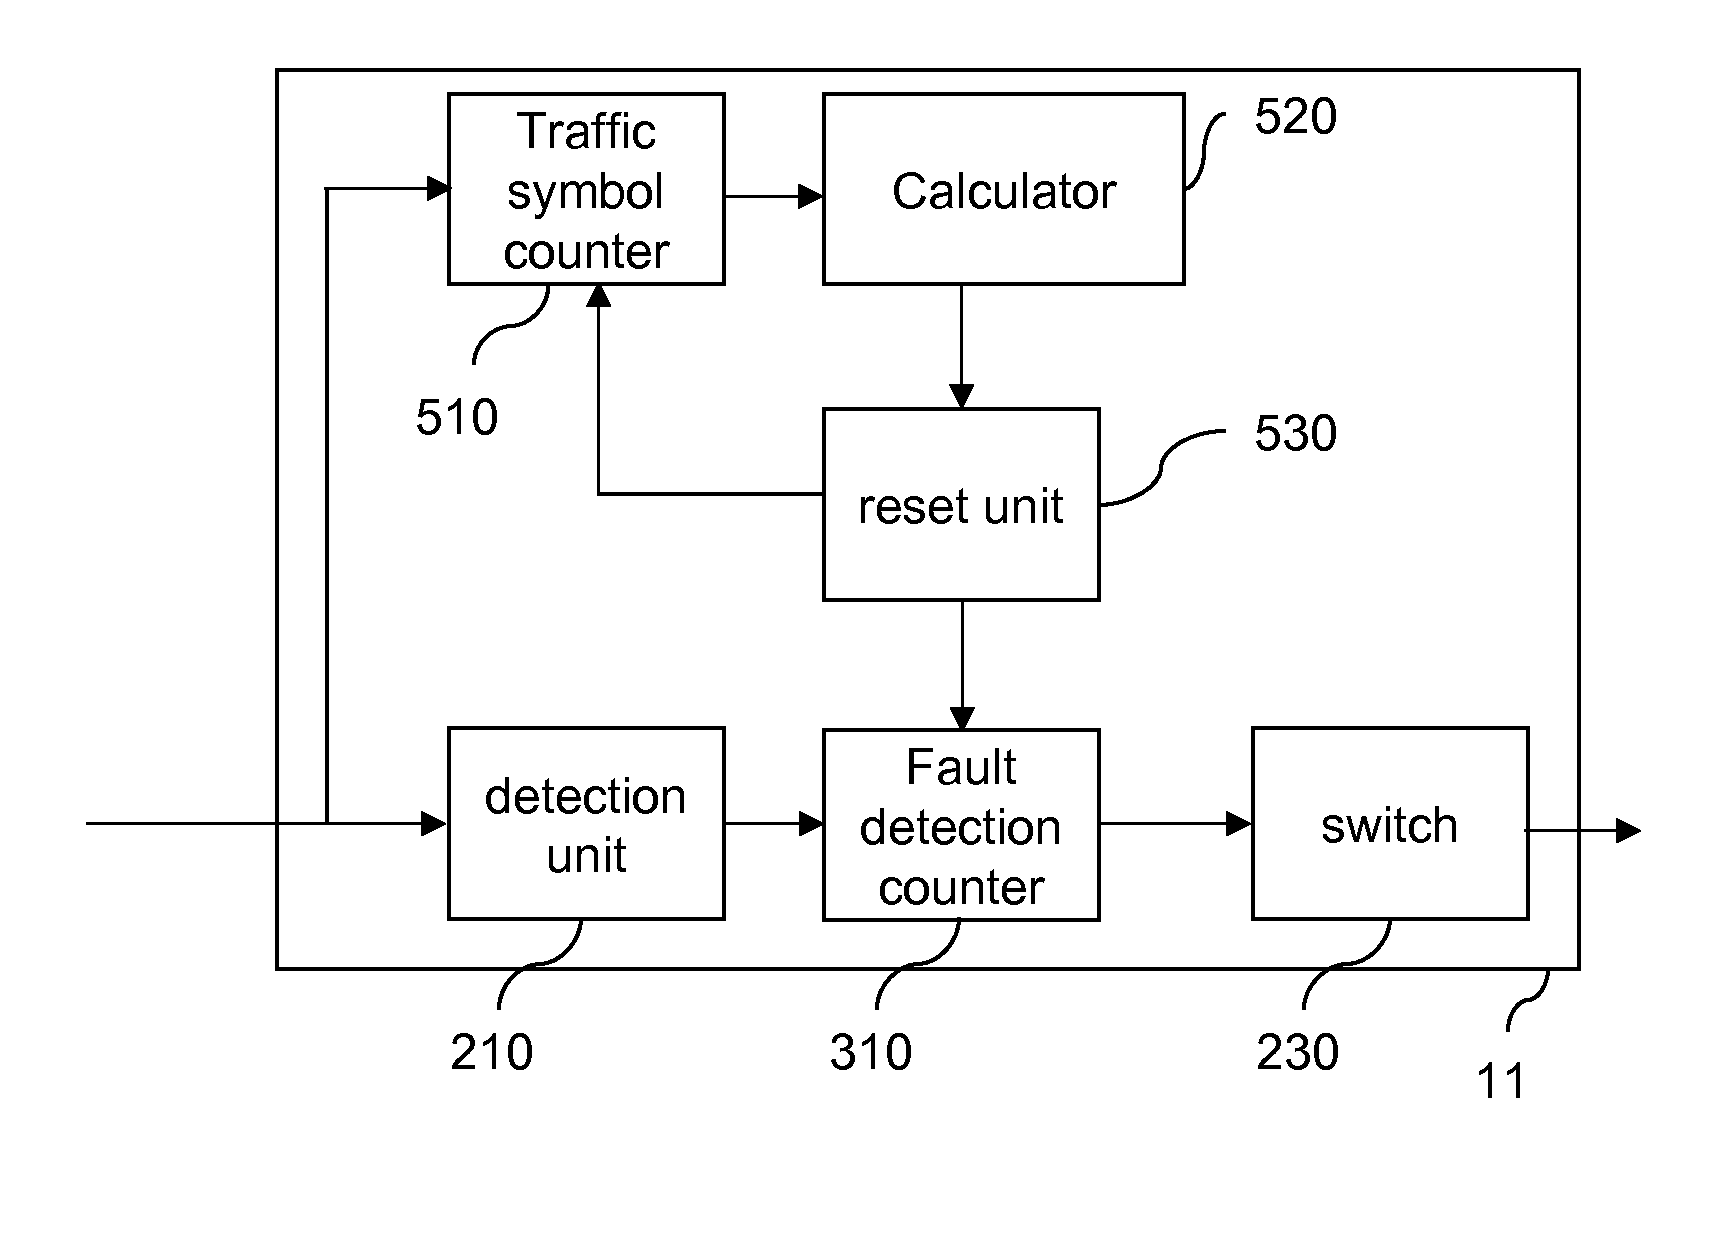 Star network and method for preventing a repeatedly transmission of a control symbol in such a star network